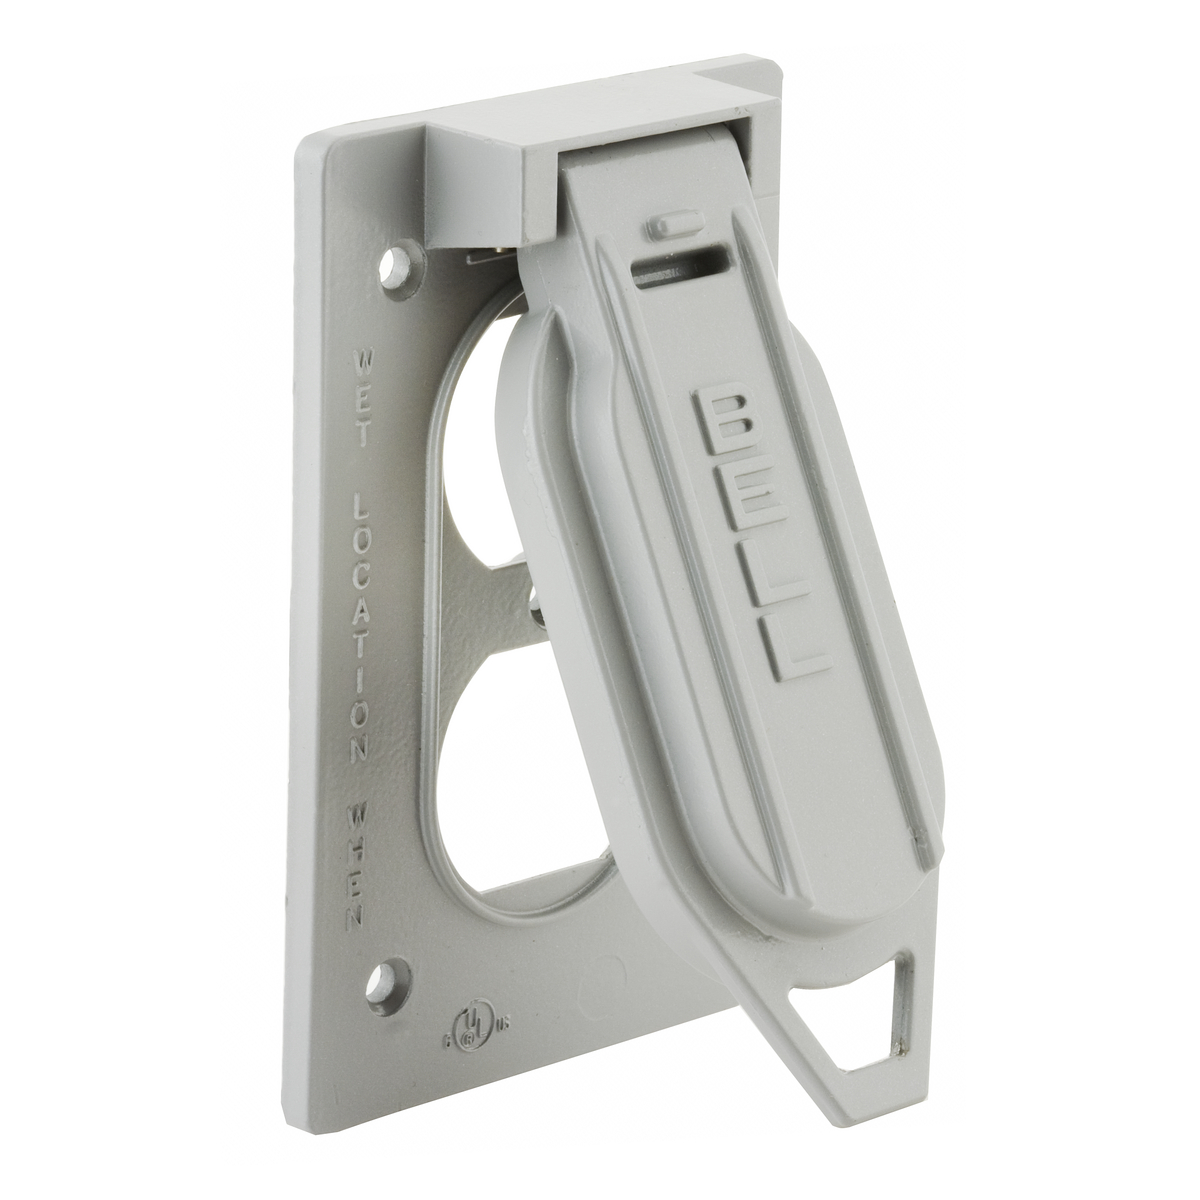 Hubbell-Bell 5027-0 1-Gang Weatherproof Vertical Duplex Receptacle Device Cover Gray 